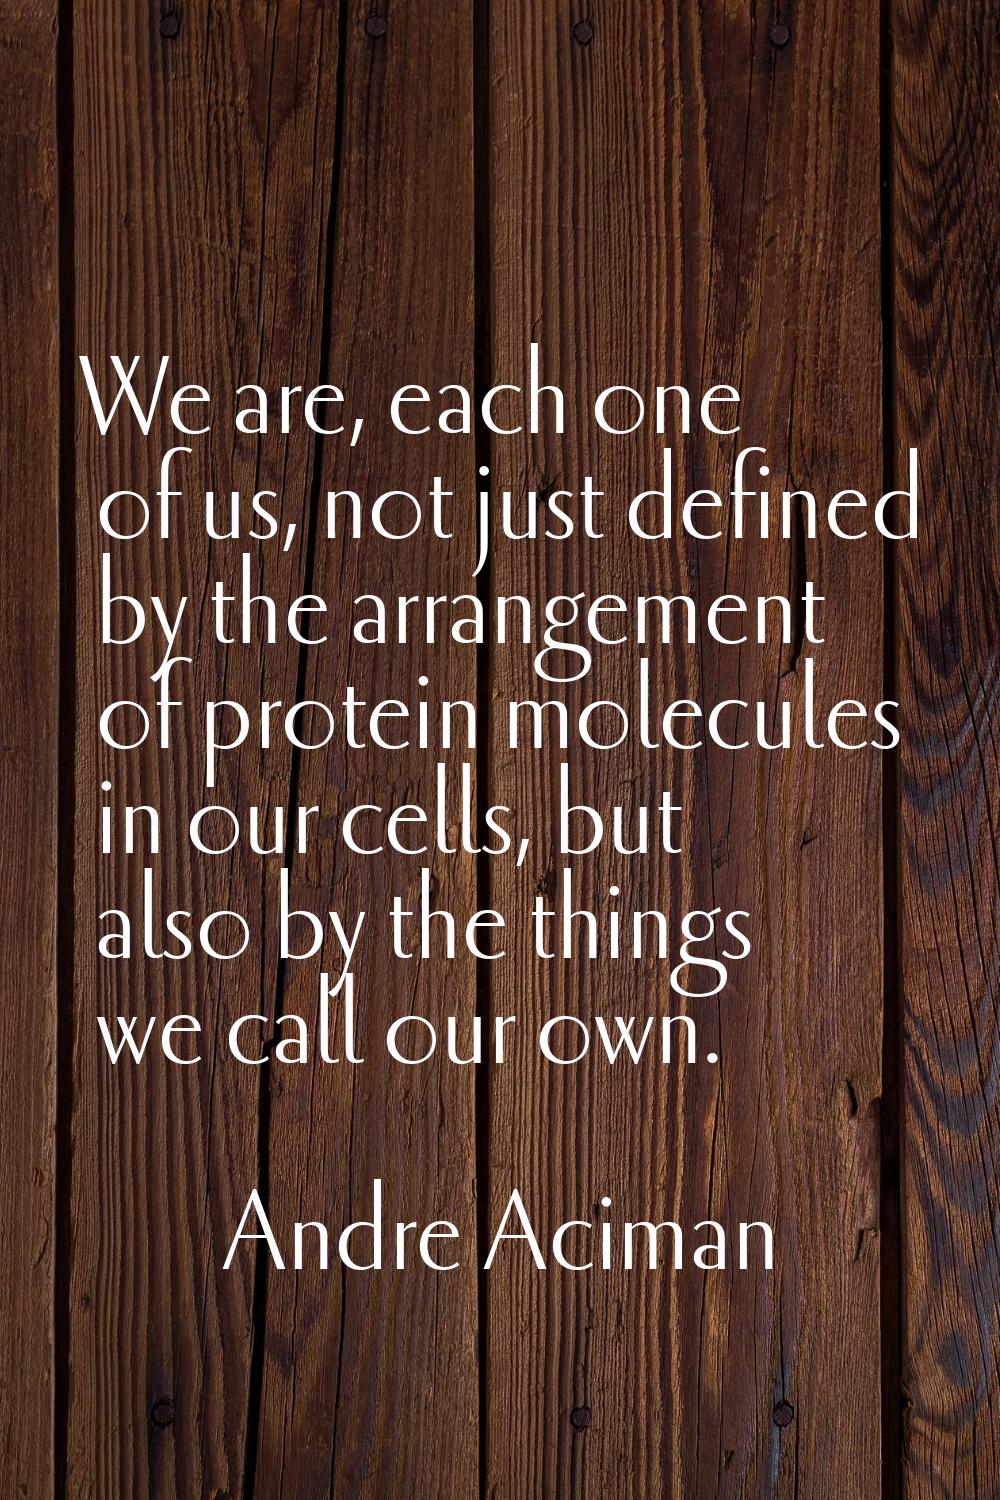 We are, each one of us, not just defined by the arrangement of protein molecules in our cells, but 